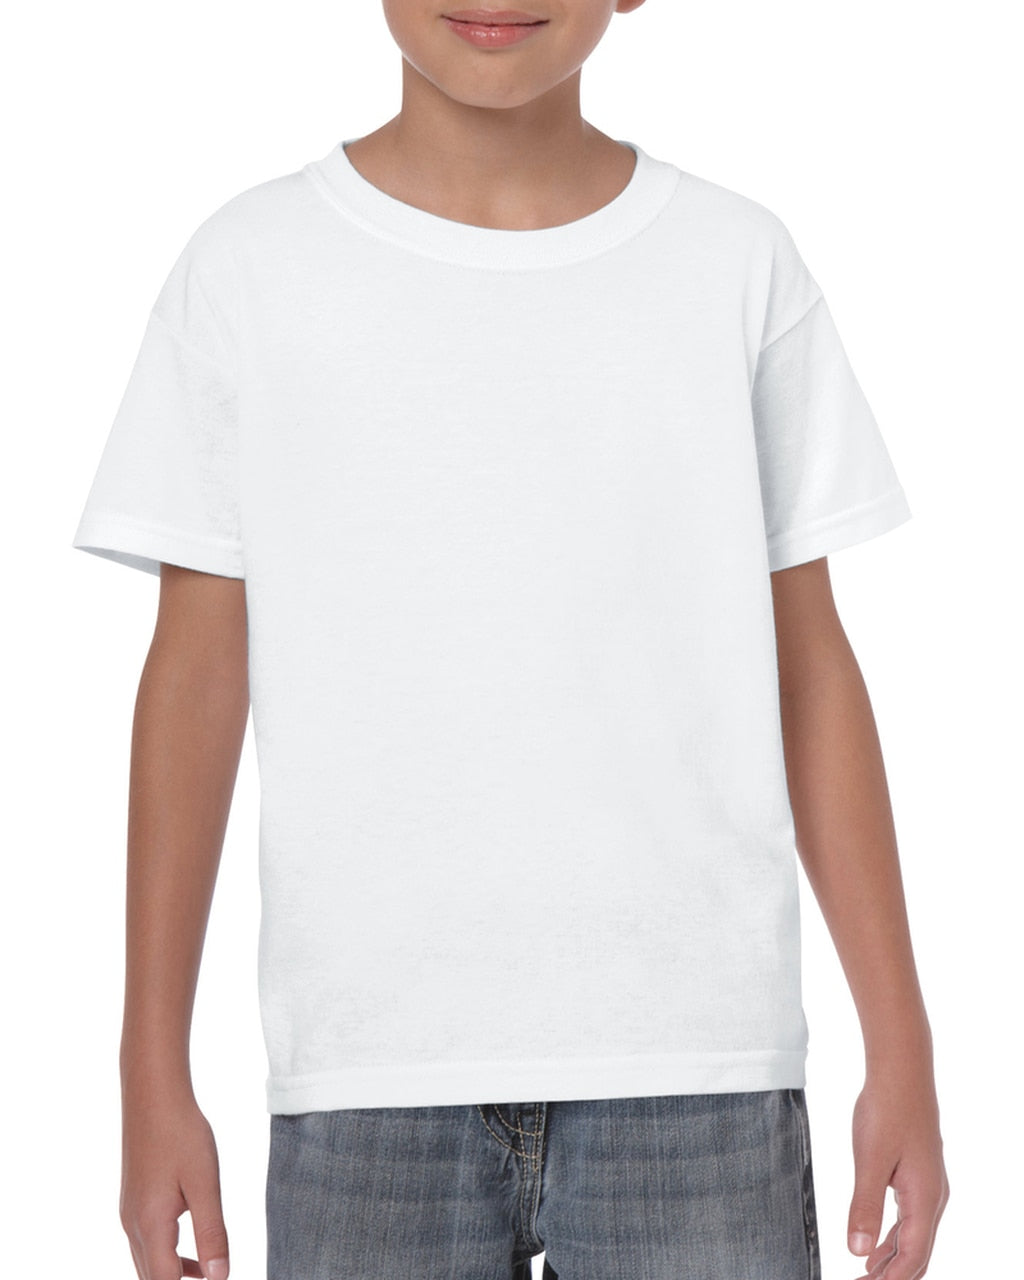 1007-Youth Premium Tee - White Color - AF APPARELS(USA)